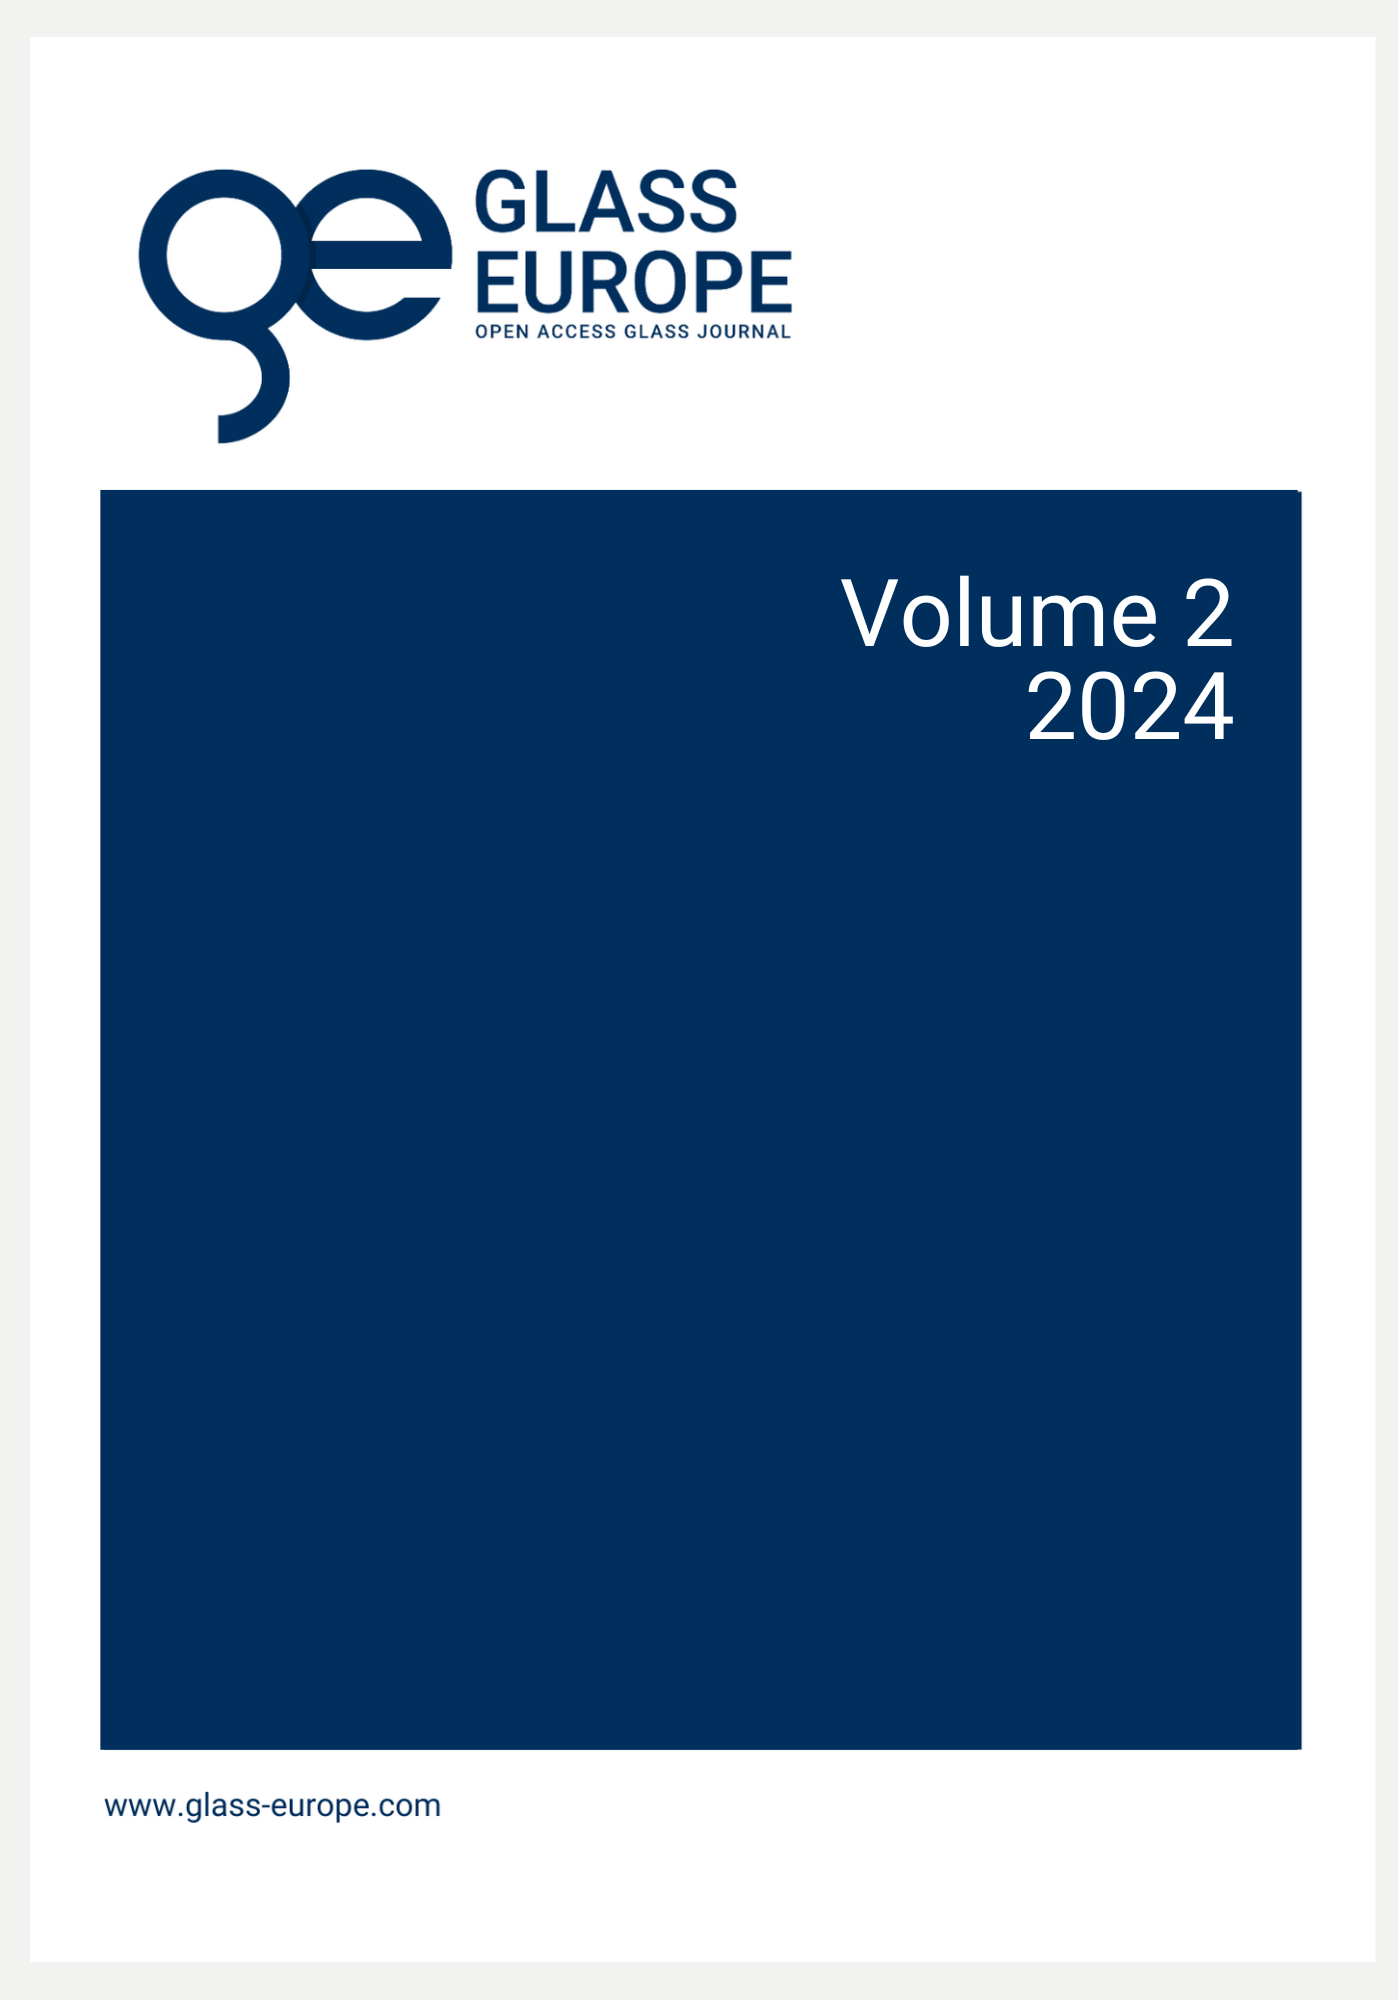 Blue and white cover of the journal Glass Euorope Volume 2, 2024